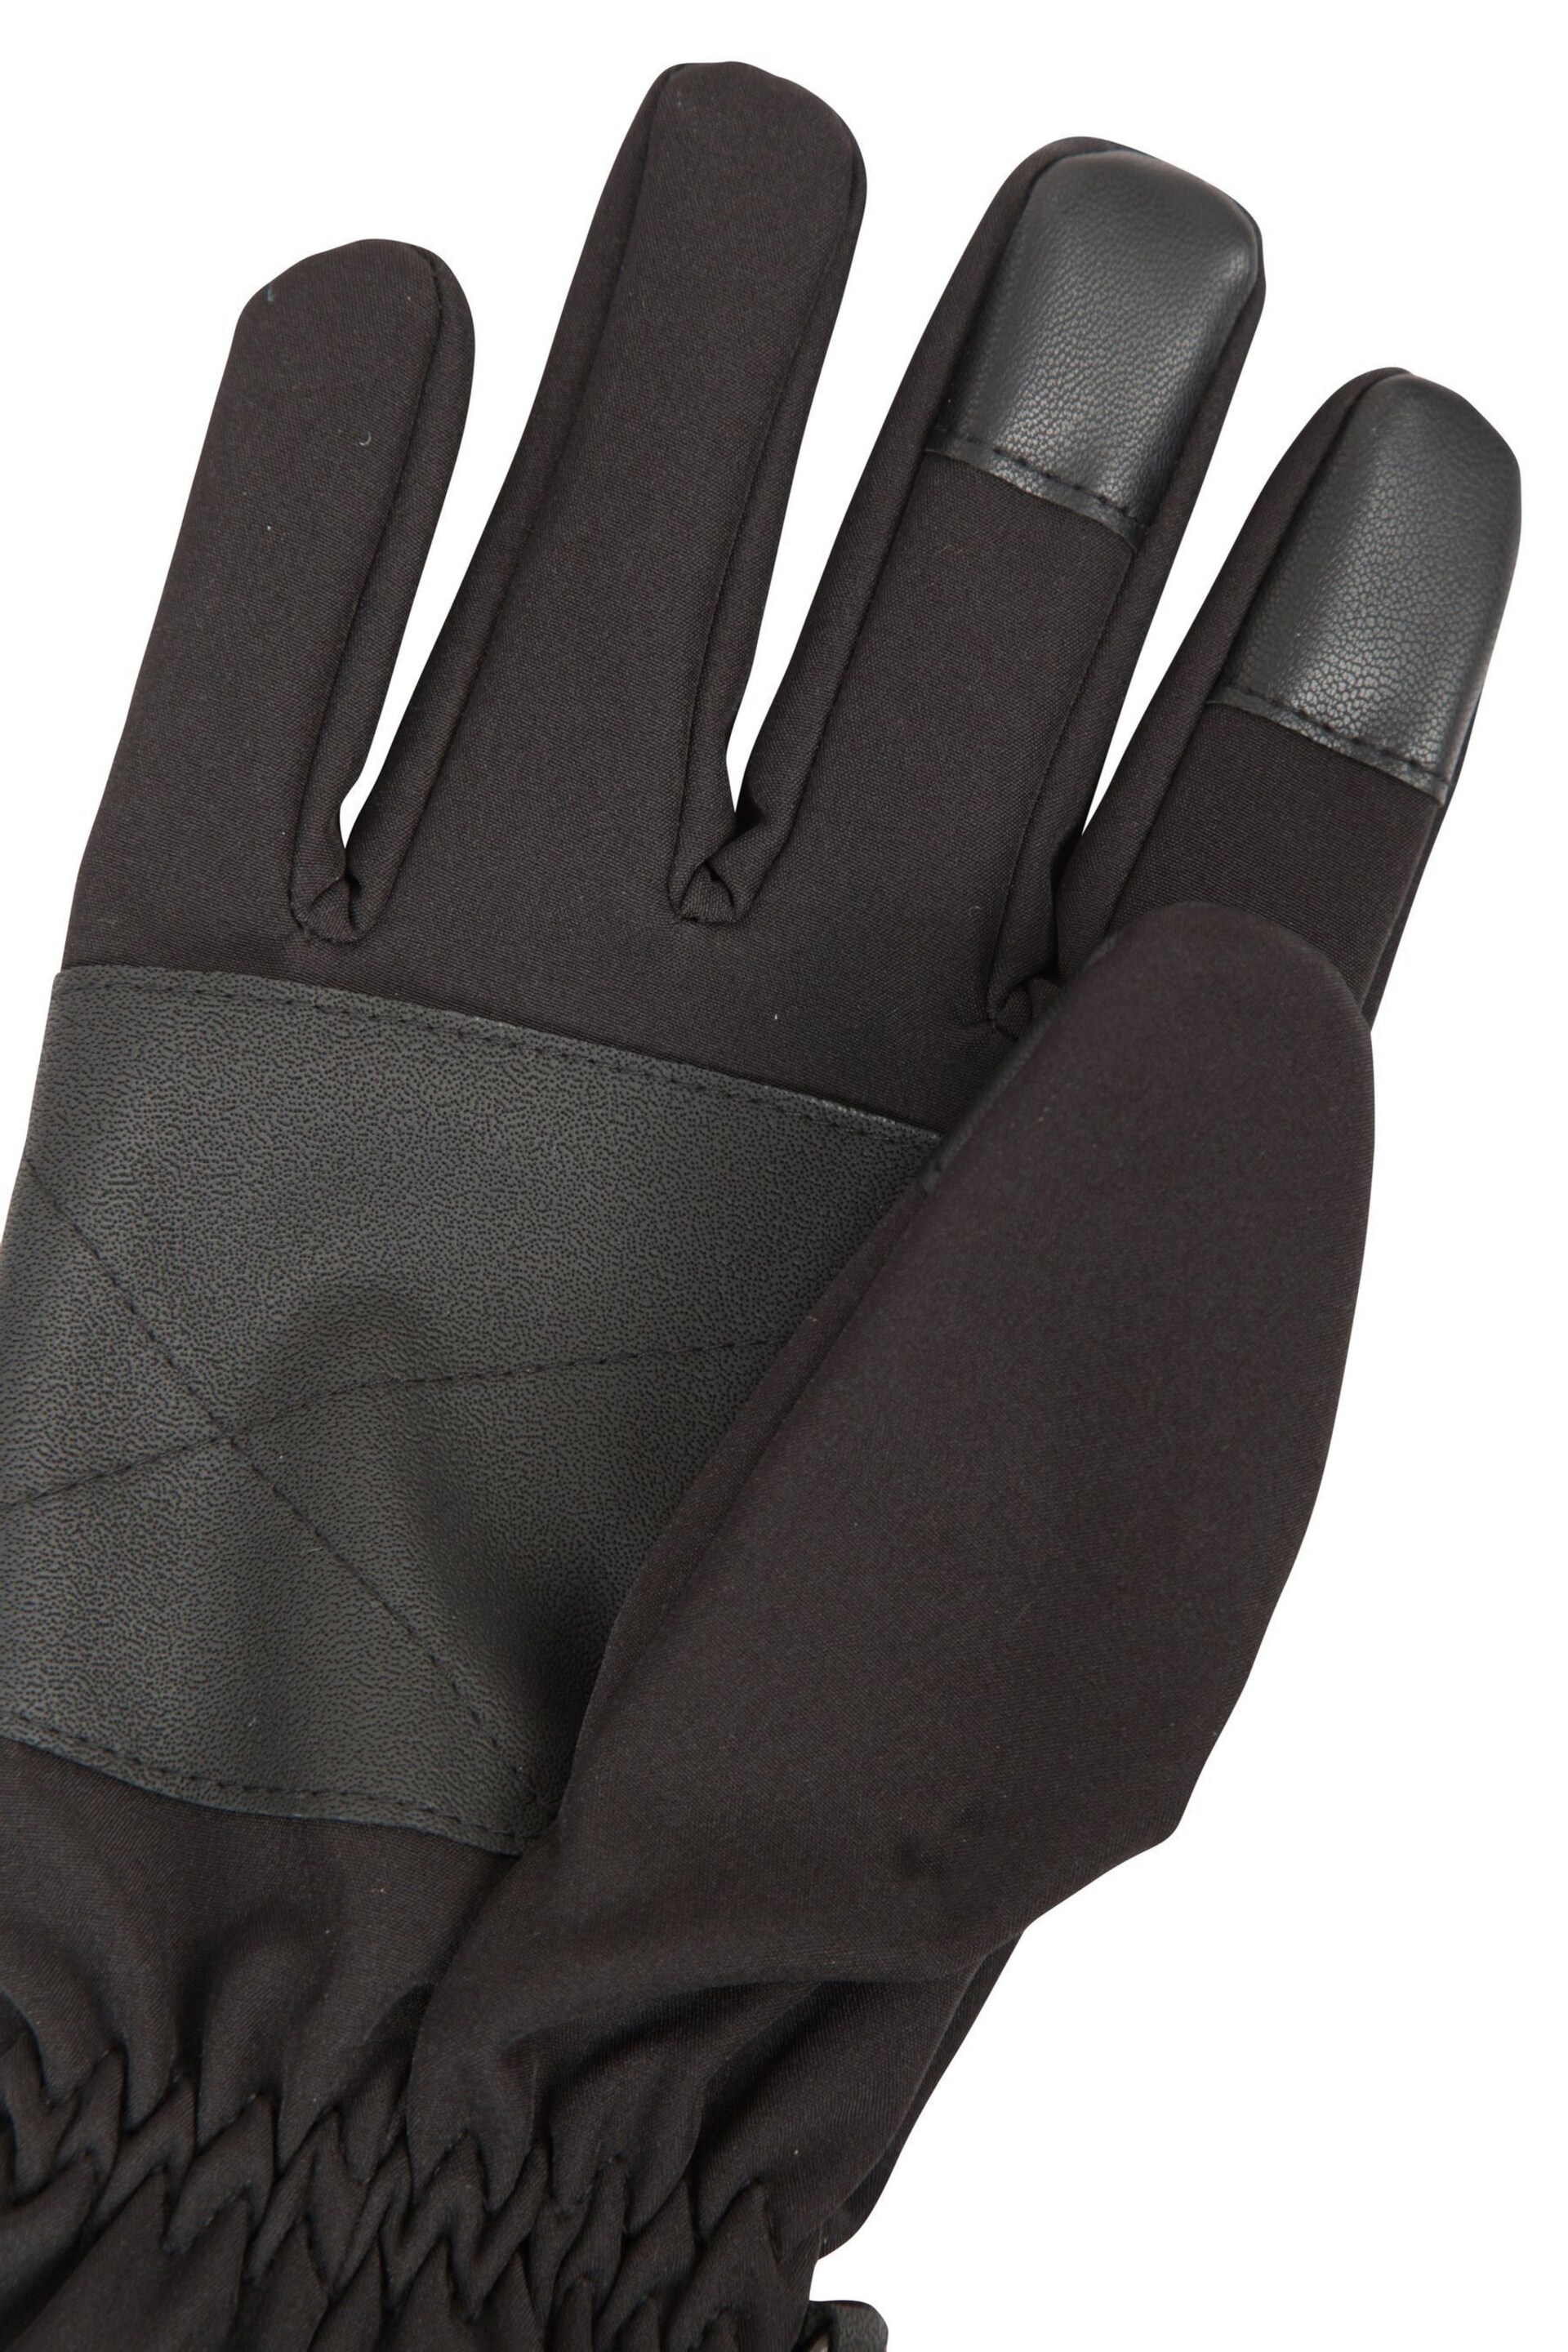 Mountain Warehouse Black Water Repellent Wind Resistant Mens Gloves - Image 5 of 5